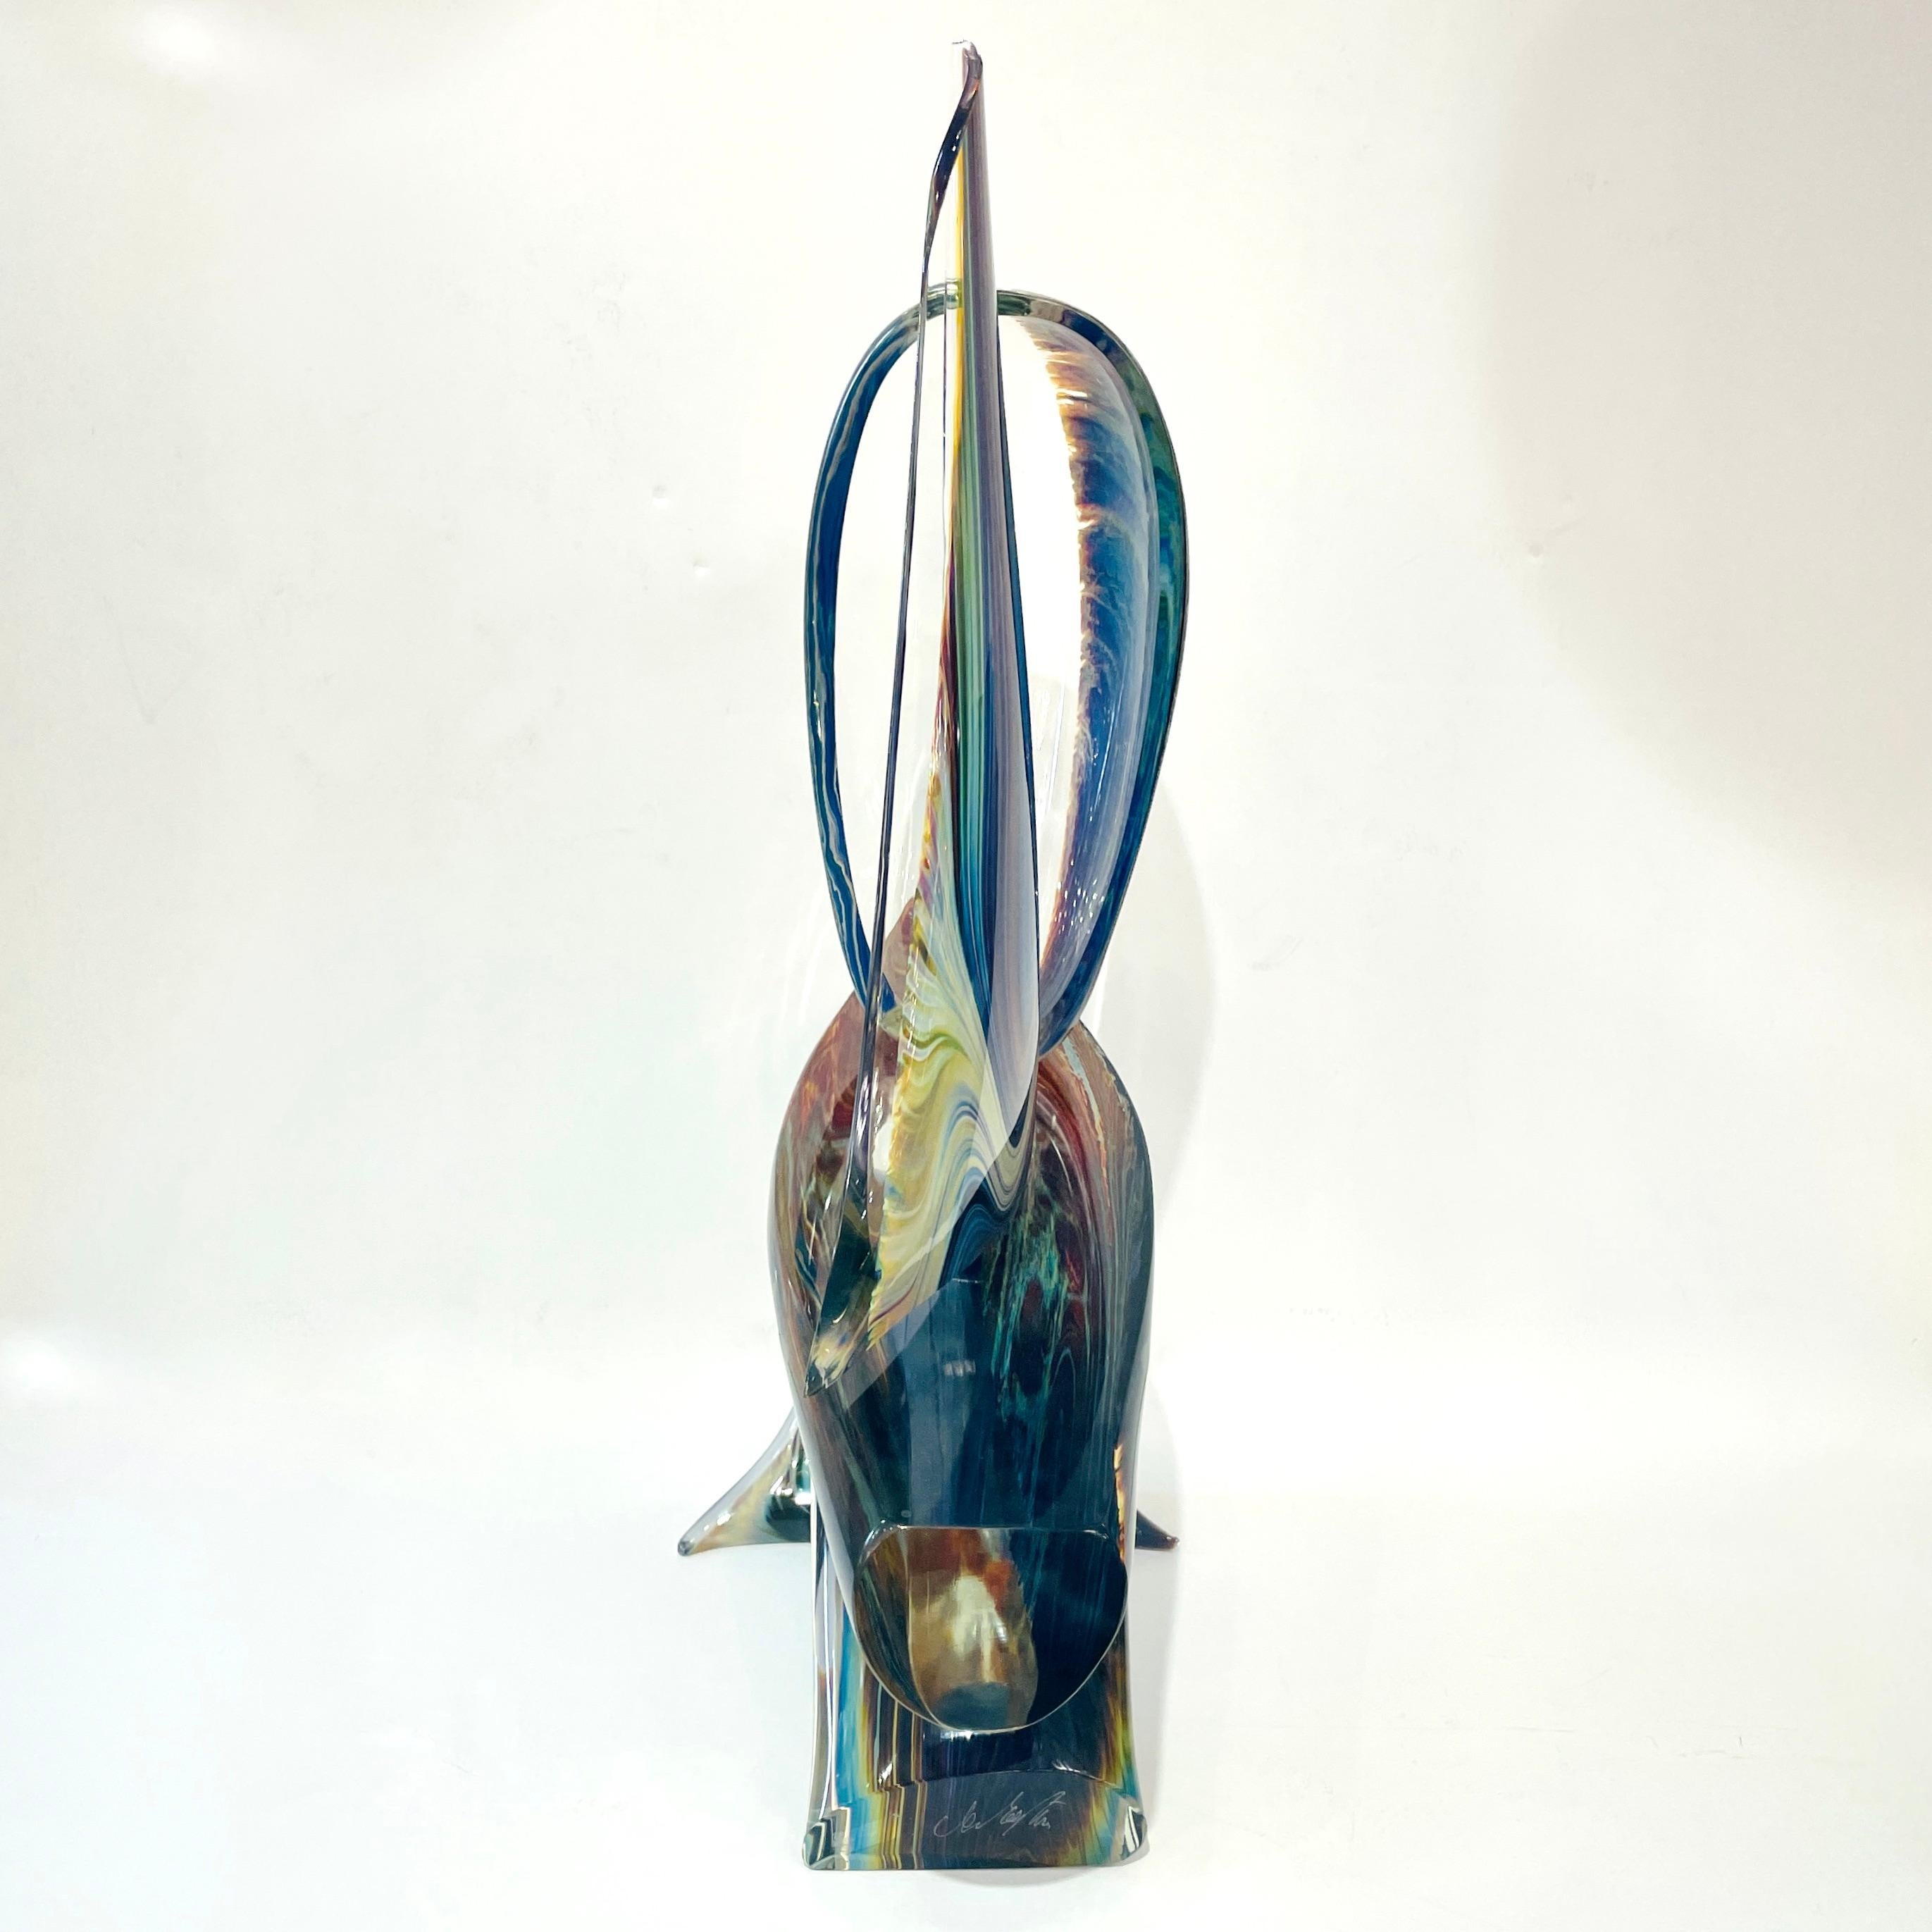 2015 Italian Yellow Blue Brown Crystal Murano Glass Boat Modernist Art Sculpture For Sale 4